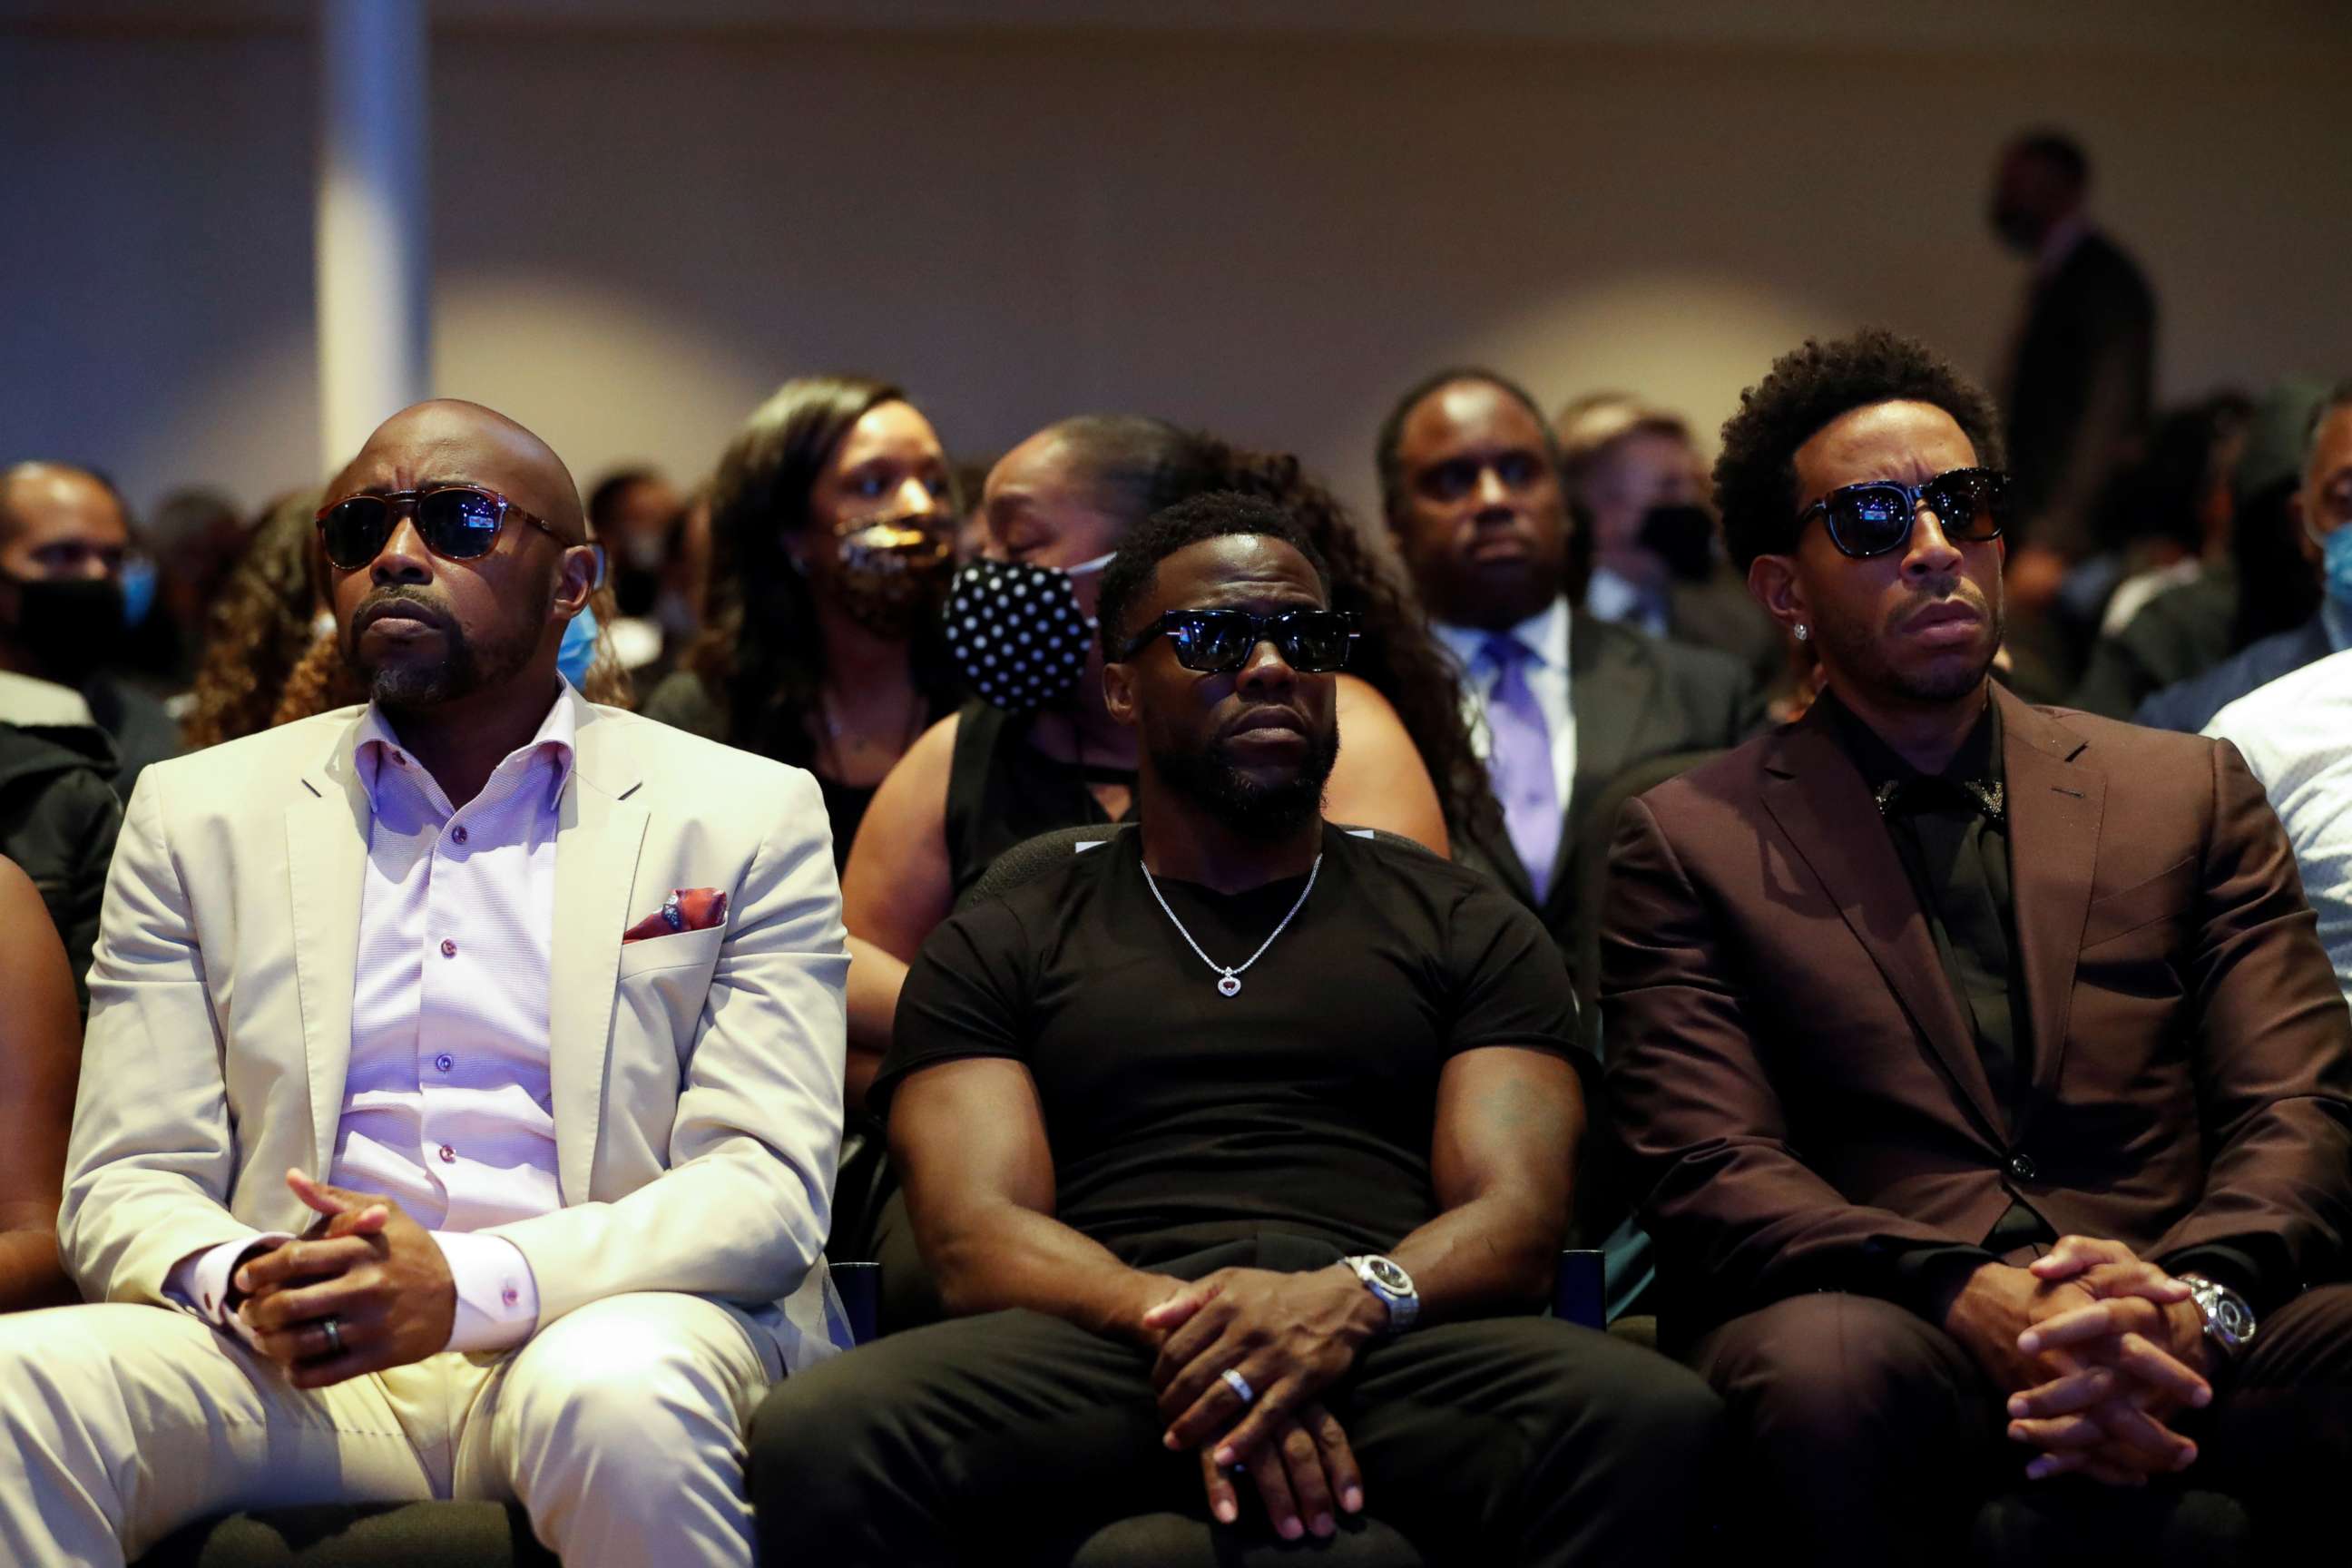 PHOTO: Actor Kevin Hart and musician Ludacris are seen during a memorial service for George Floyd following his death in Minneapolis police custody, in Minneapolis, Minnesota, June 4, 2020.